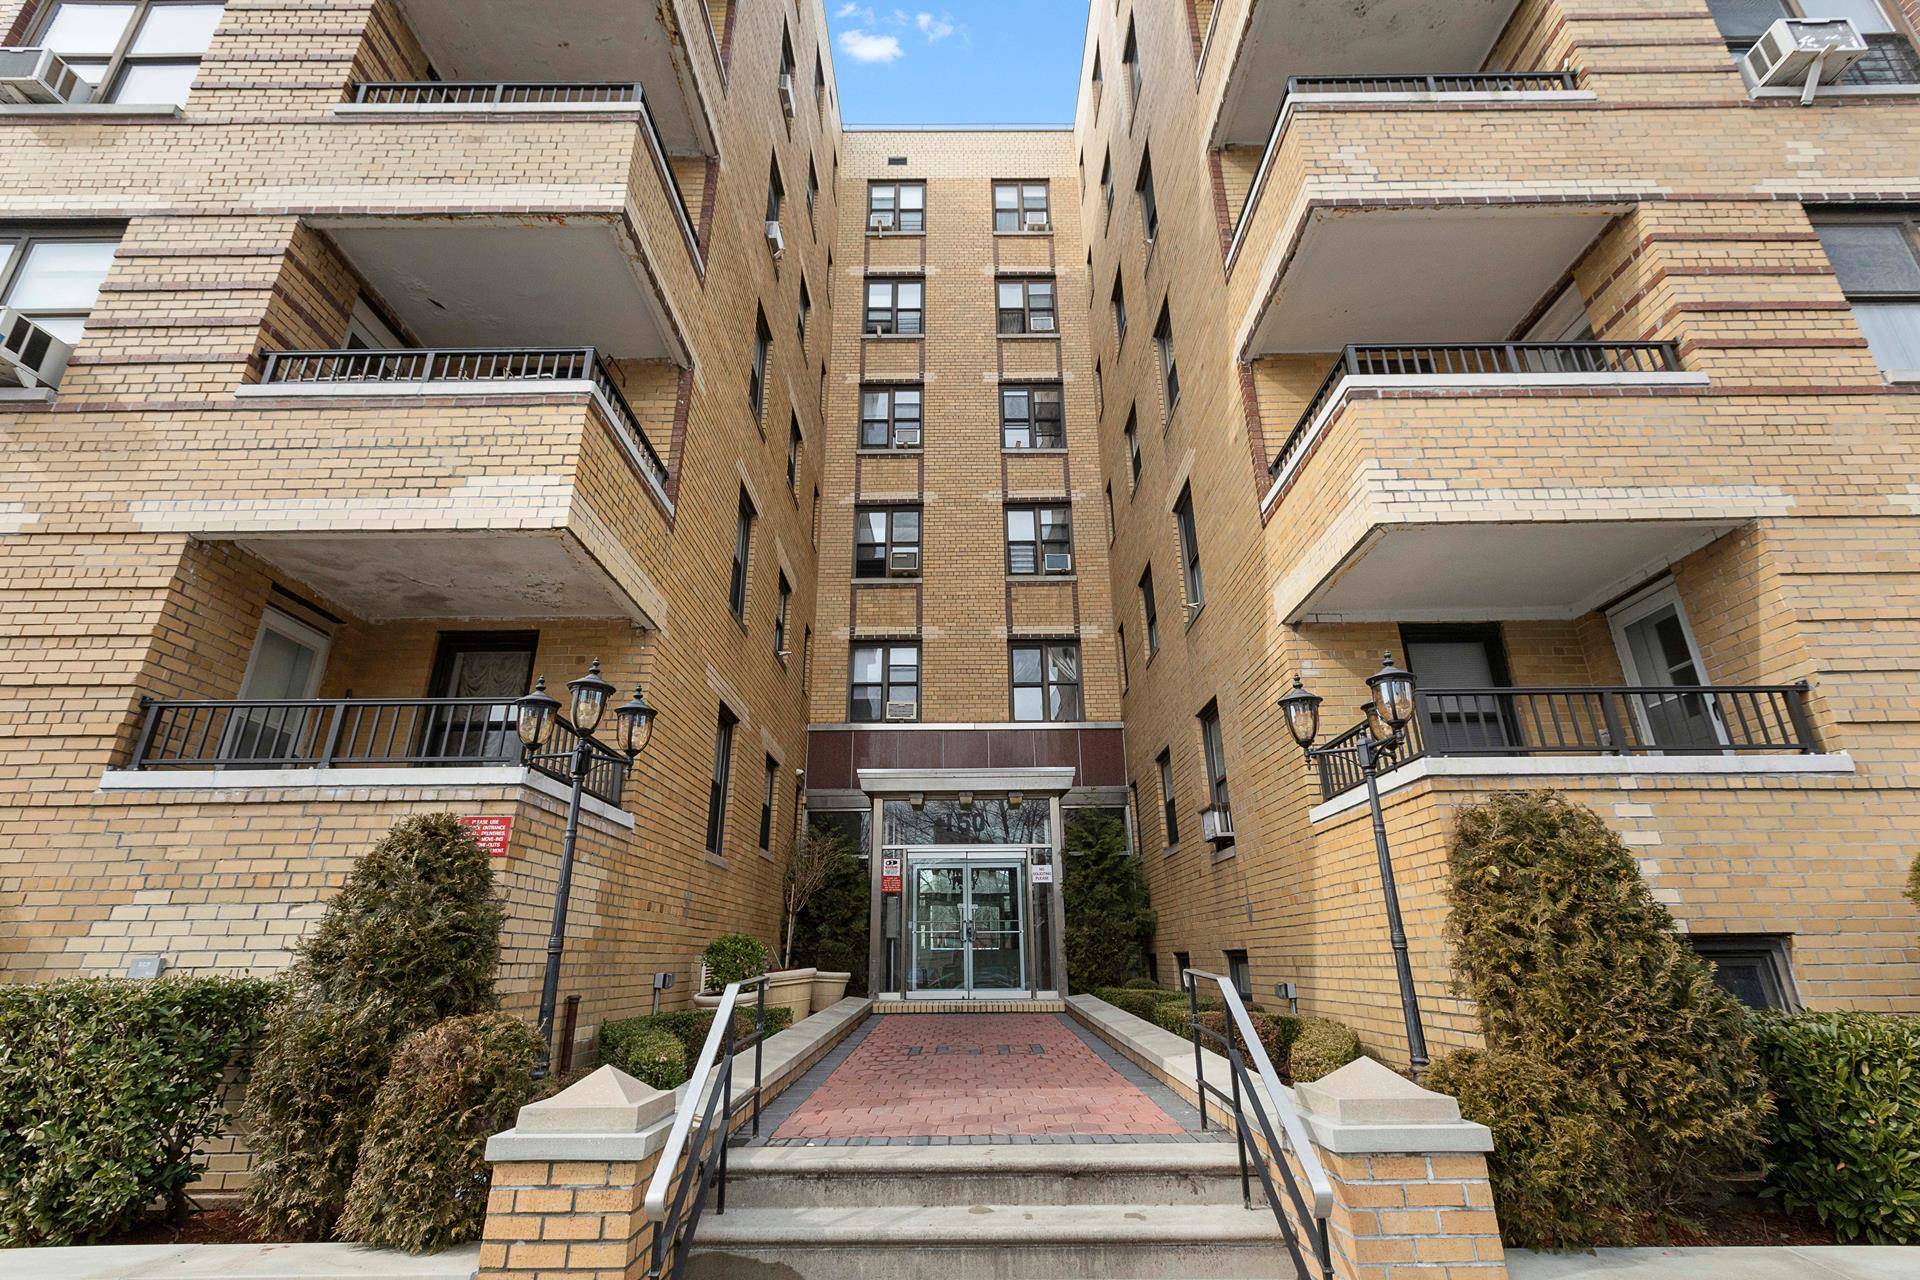 This 1 bedroom 1 bathroom Co op is located in the heart of Manhattan Beach, right near Brighton Beach and Sheepshead Bay.